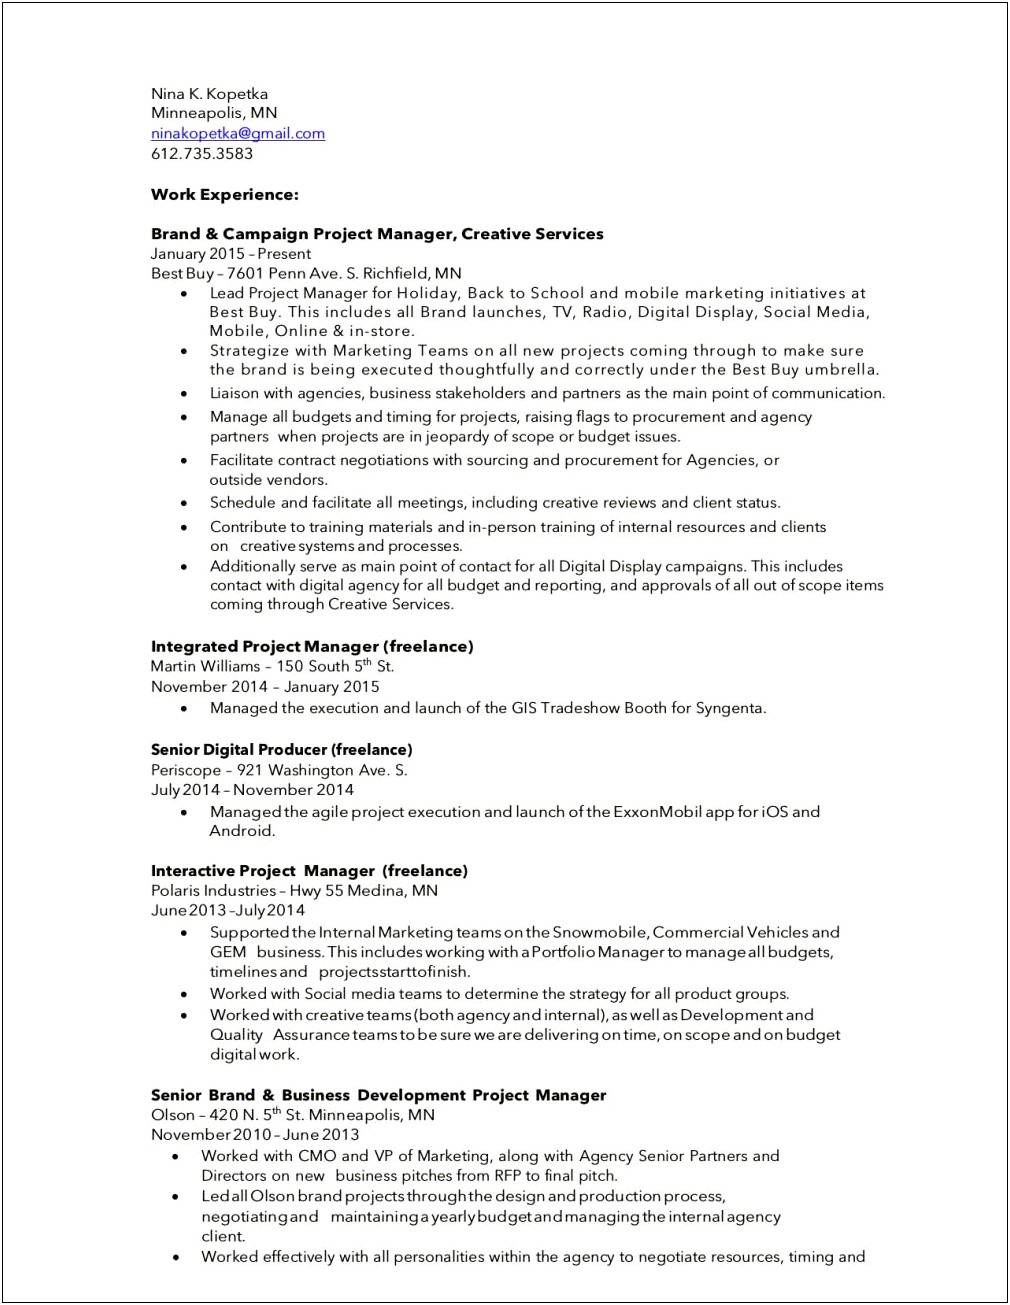 Resume And Cover Letter Tips Umuc